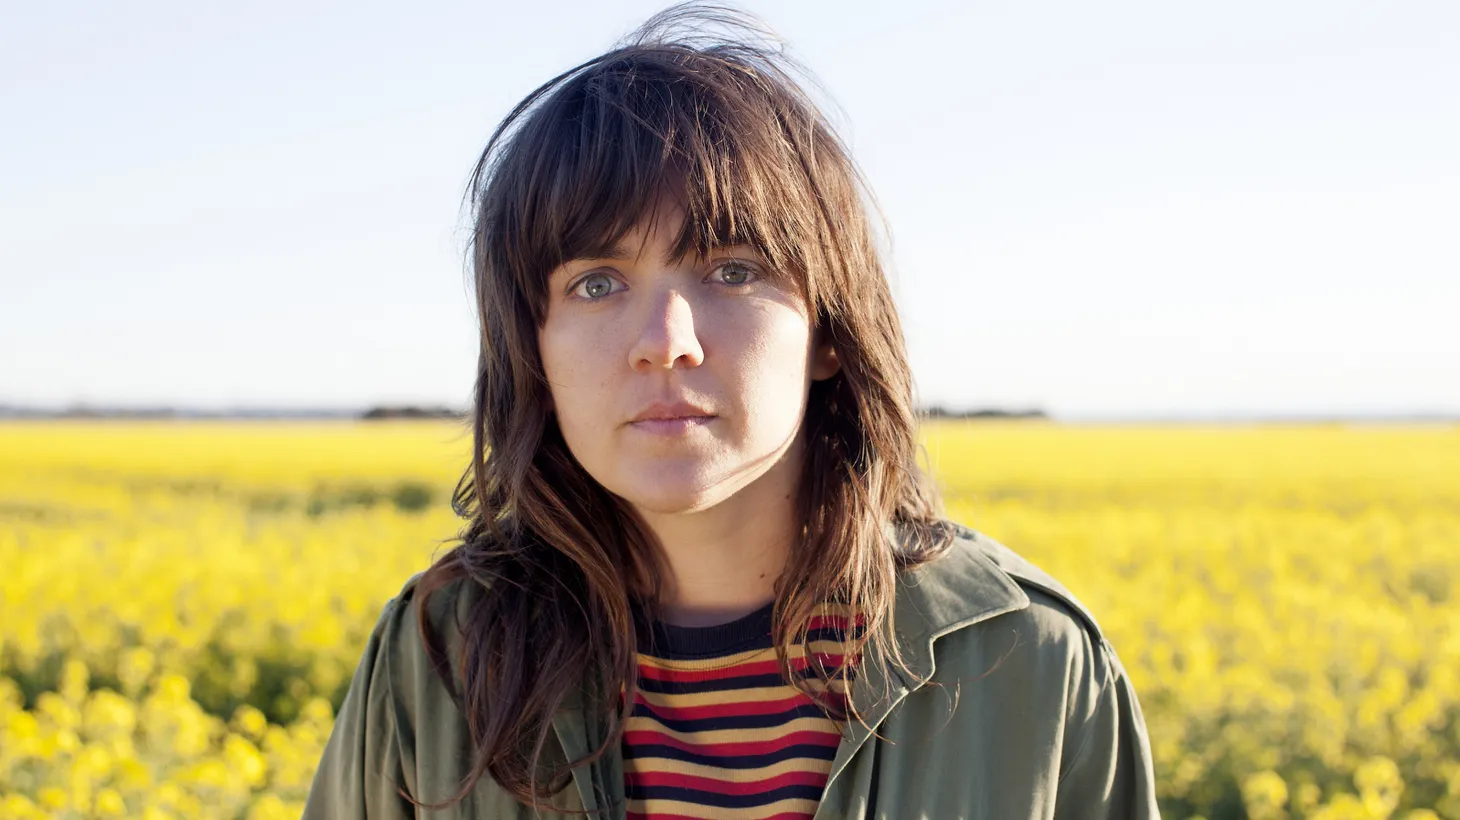 Raucous raw energy fuels Aussie singer and guitarist Courtney Barnett, who is one of the most buzzed about indie artists of the moment. We’re thrilled to have her in studio to play songs from her new album.